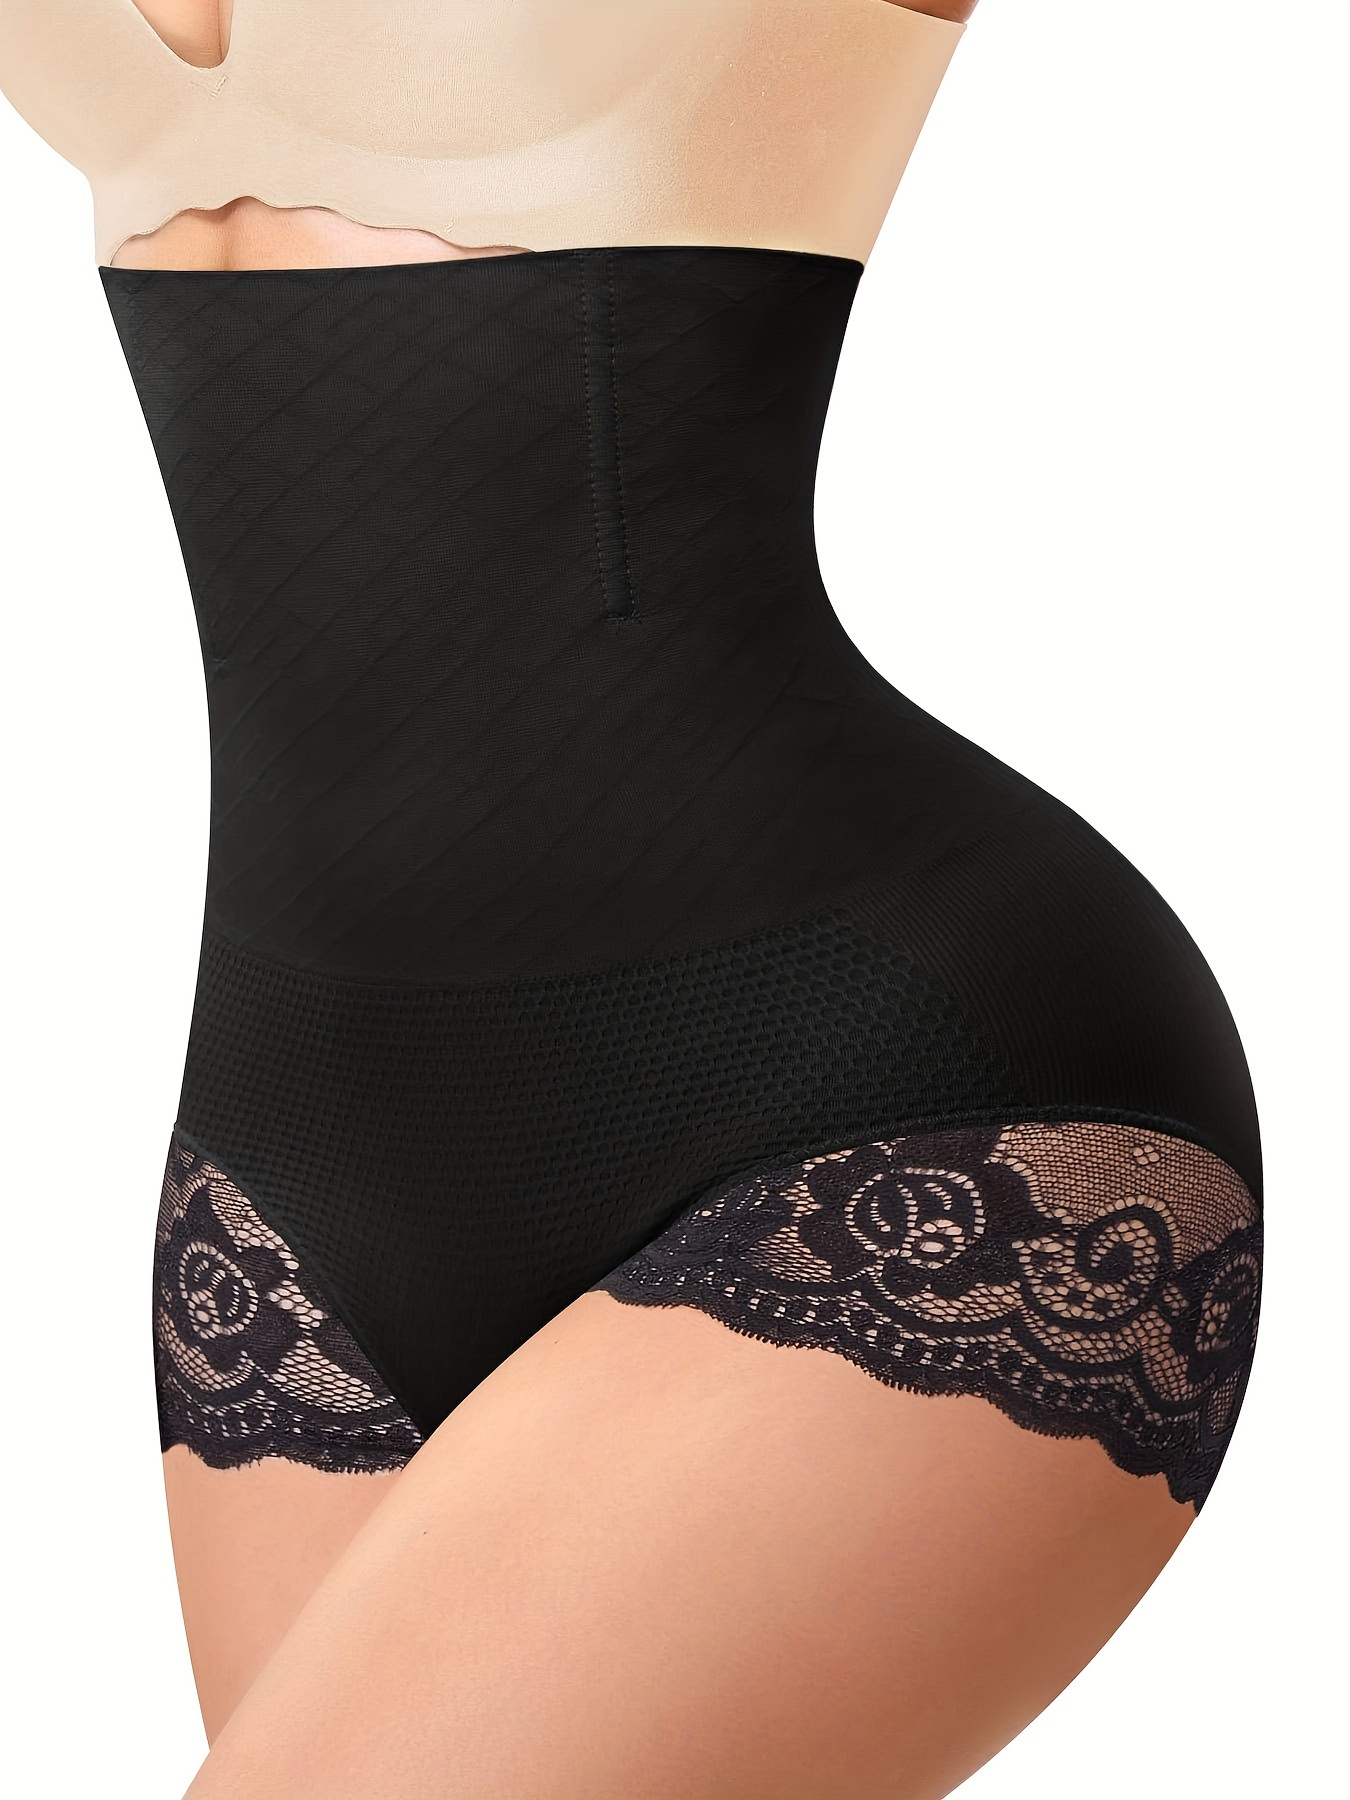 Large size lace tummy control panties, high-waisted, slimming, covering the  flesh, lifting buttocks, body-shaping pants for women to control the tummy  in all seasons without curling